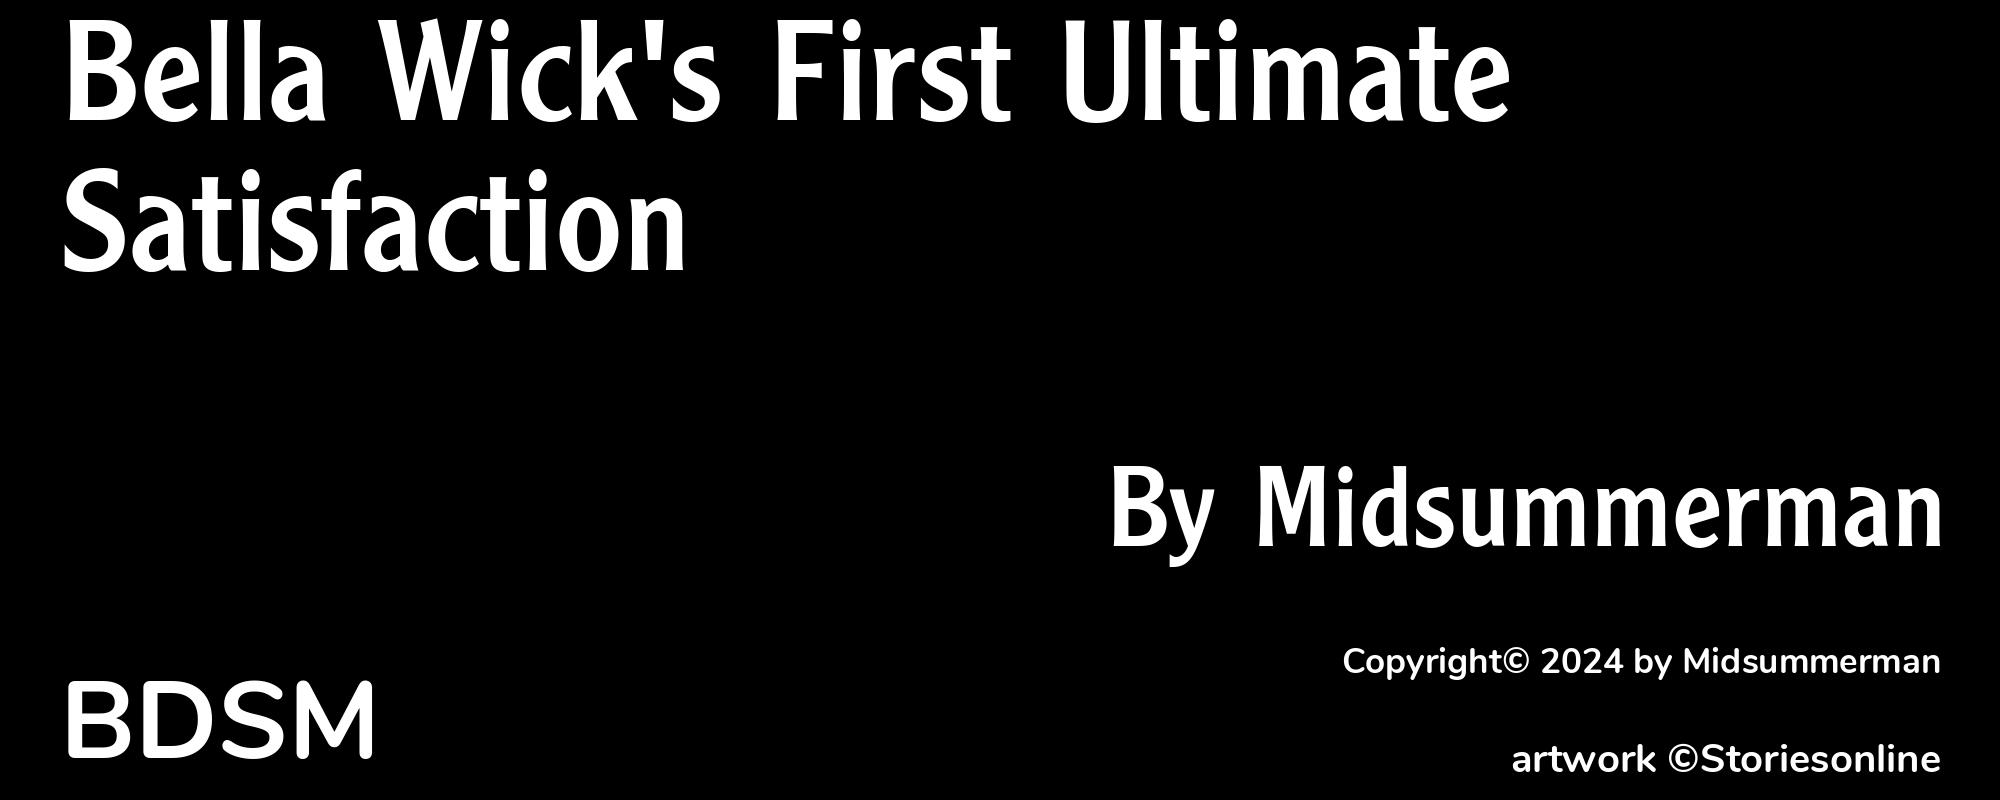 Bella Wick's First Ultimate Satisfaction - Cover